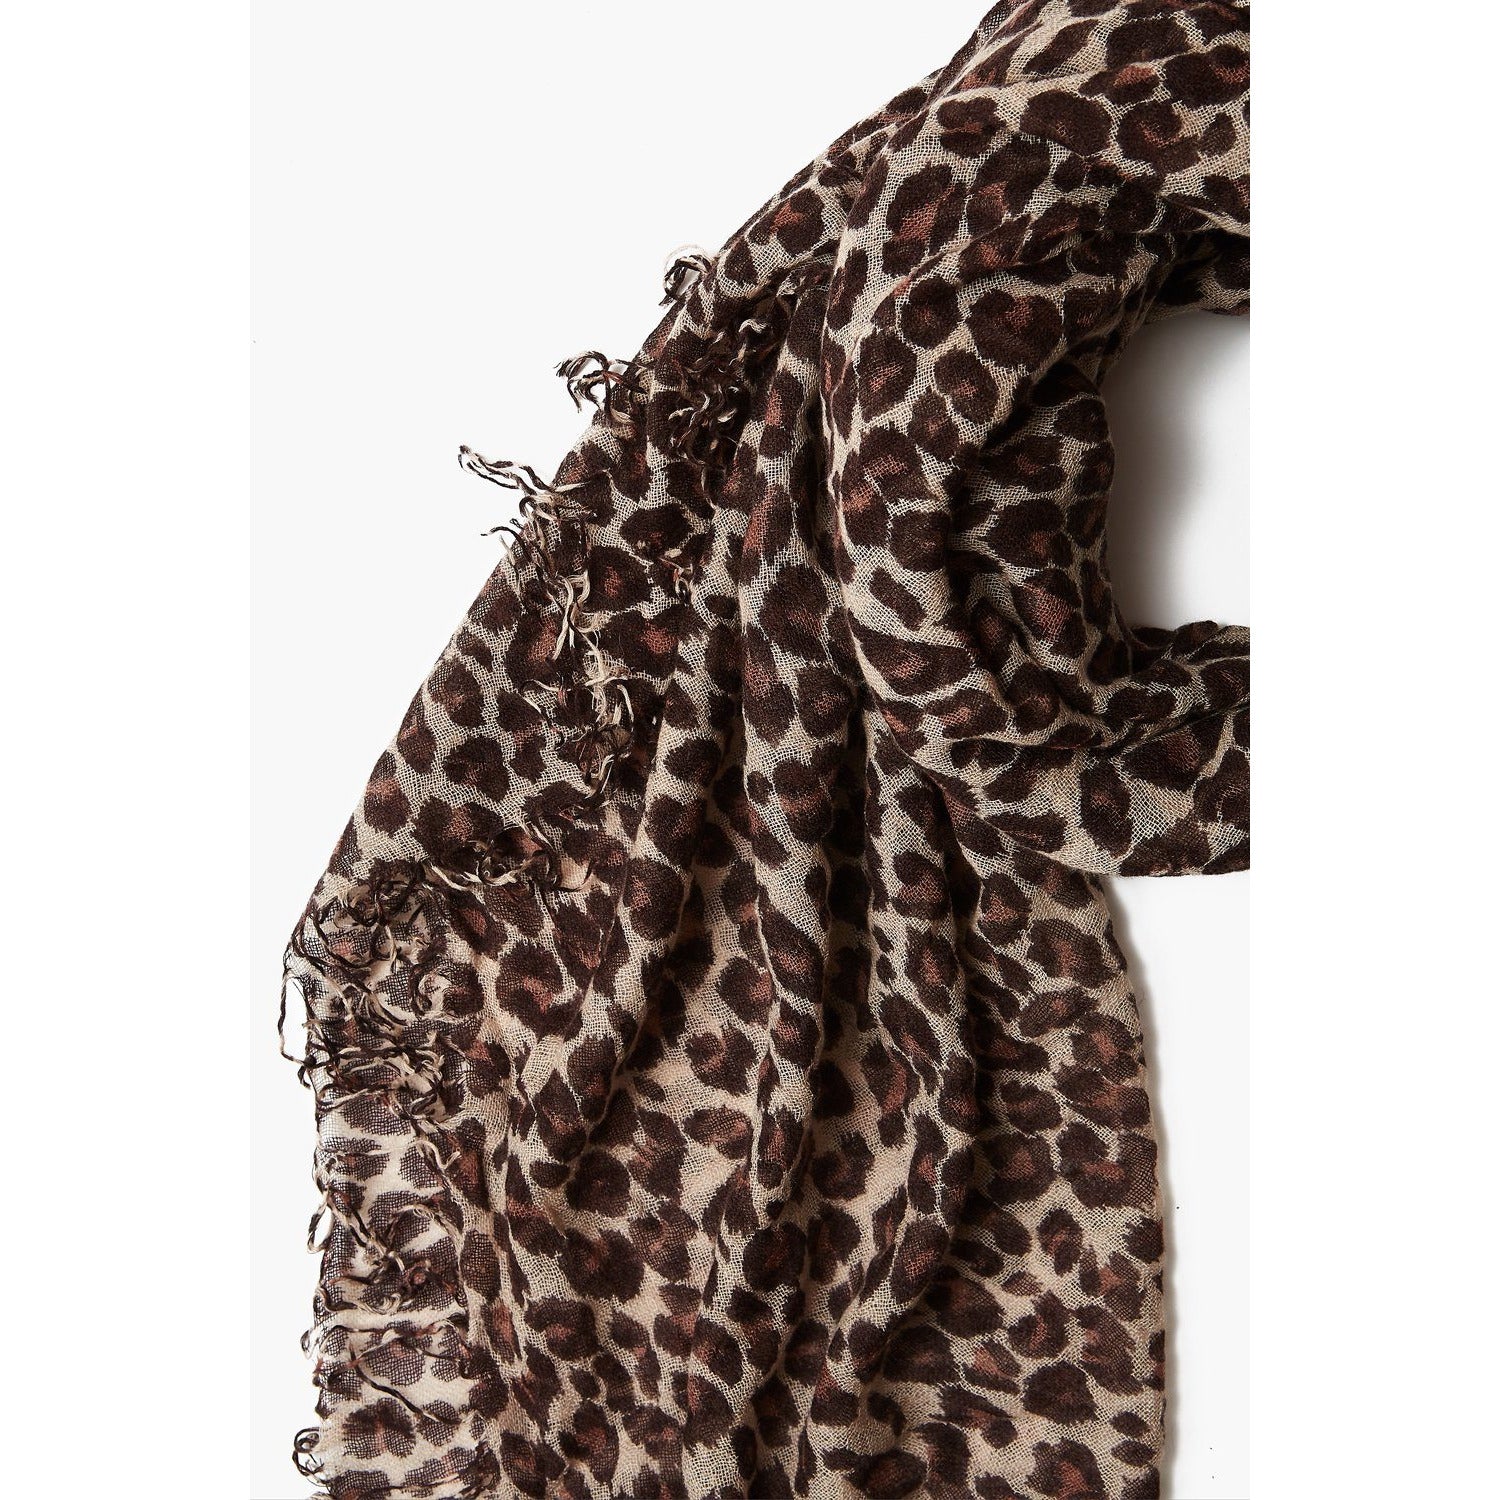  LissKiss Khaki With Small Brown Horses Unisex Scarf